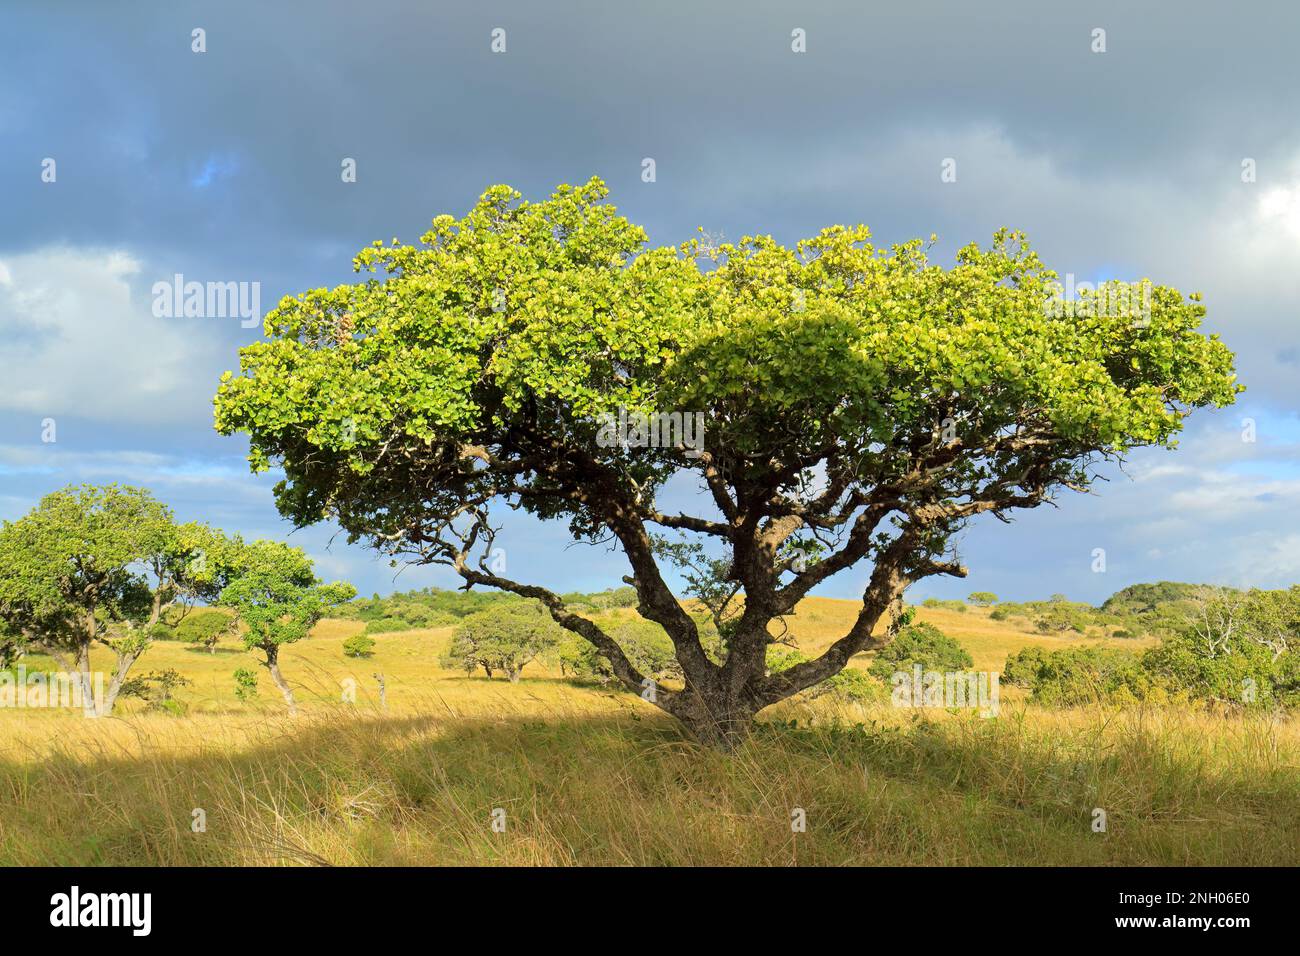 African savannah landscape with trees in grassland with a cloudy sky, South Africa Stock Photo